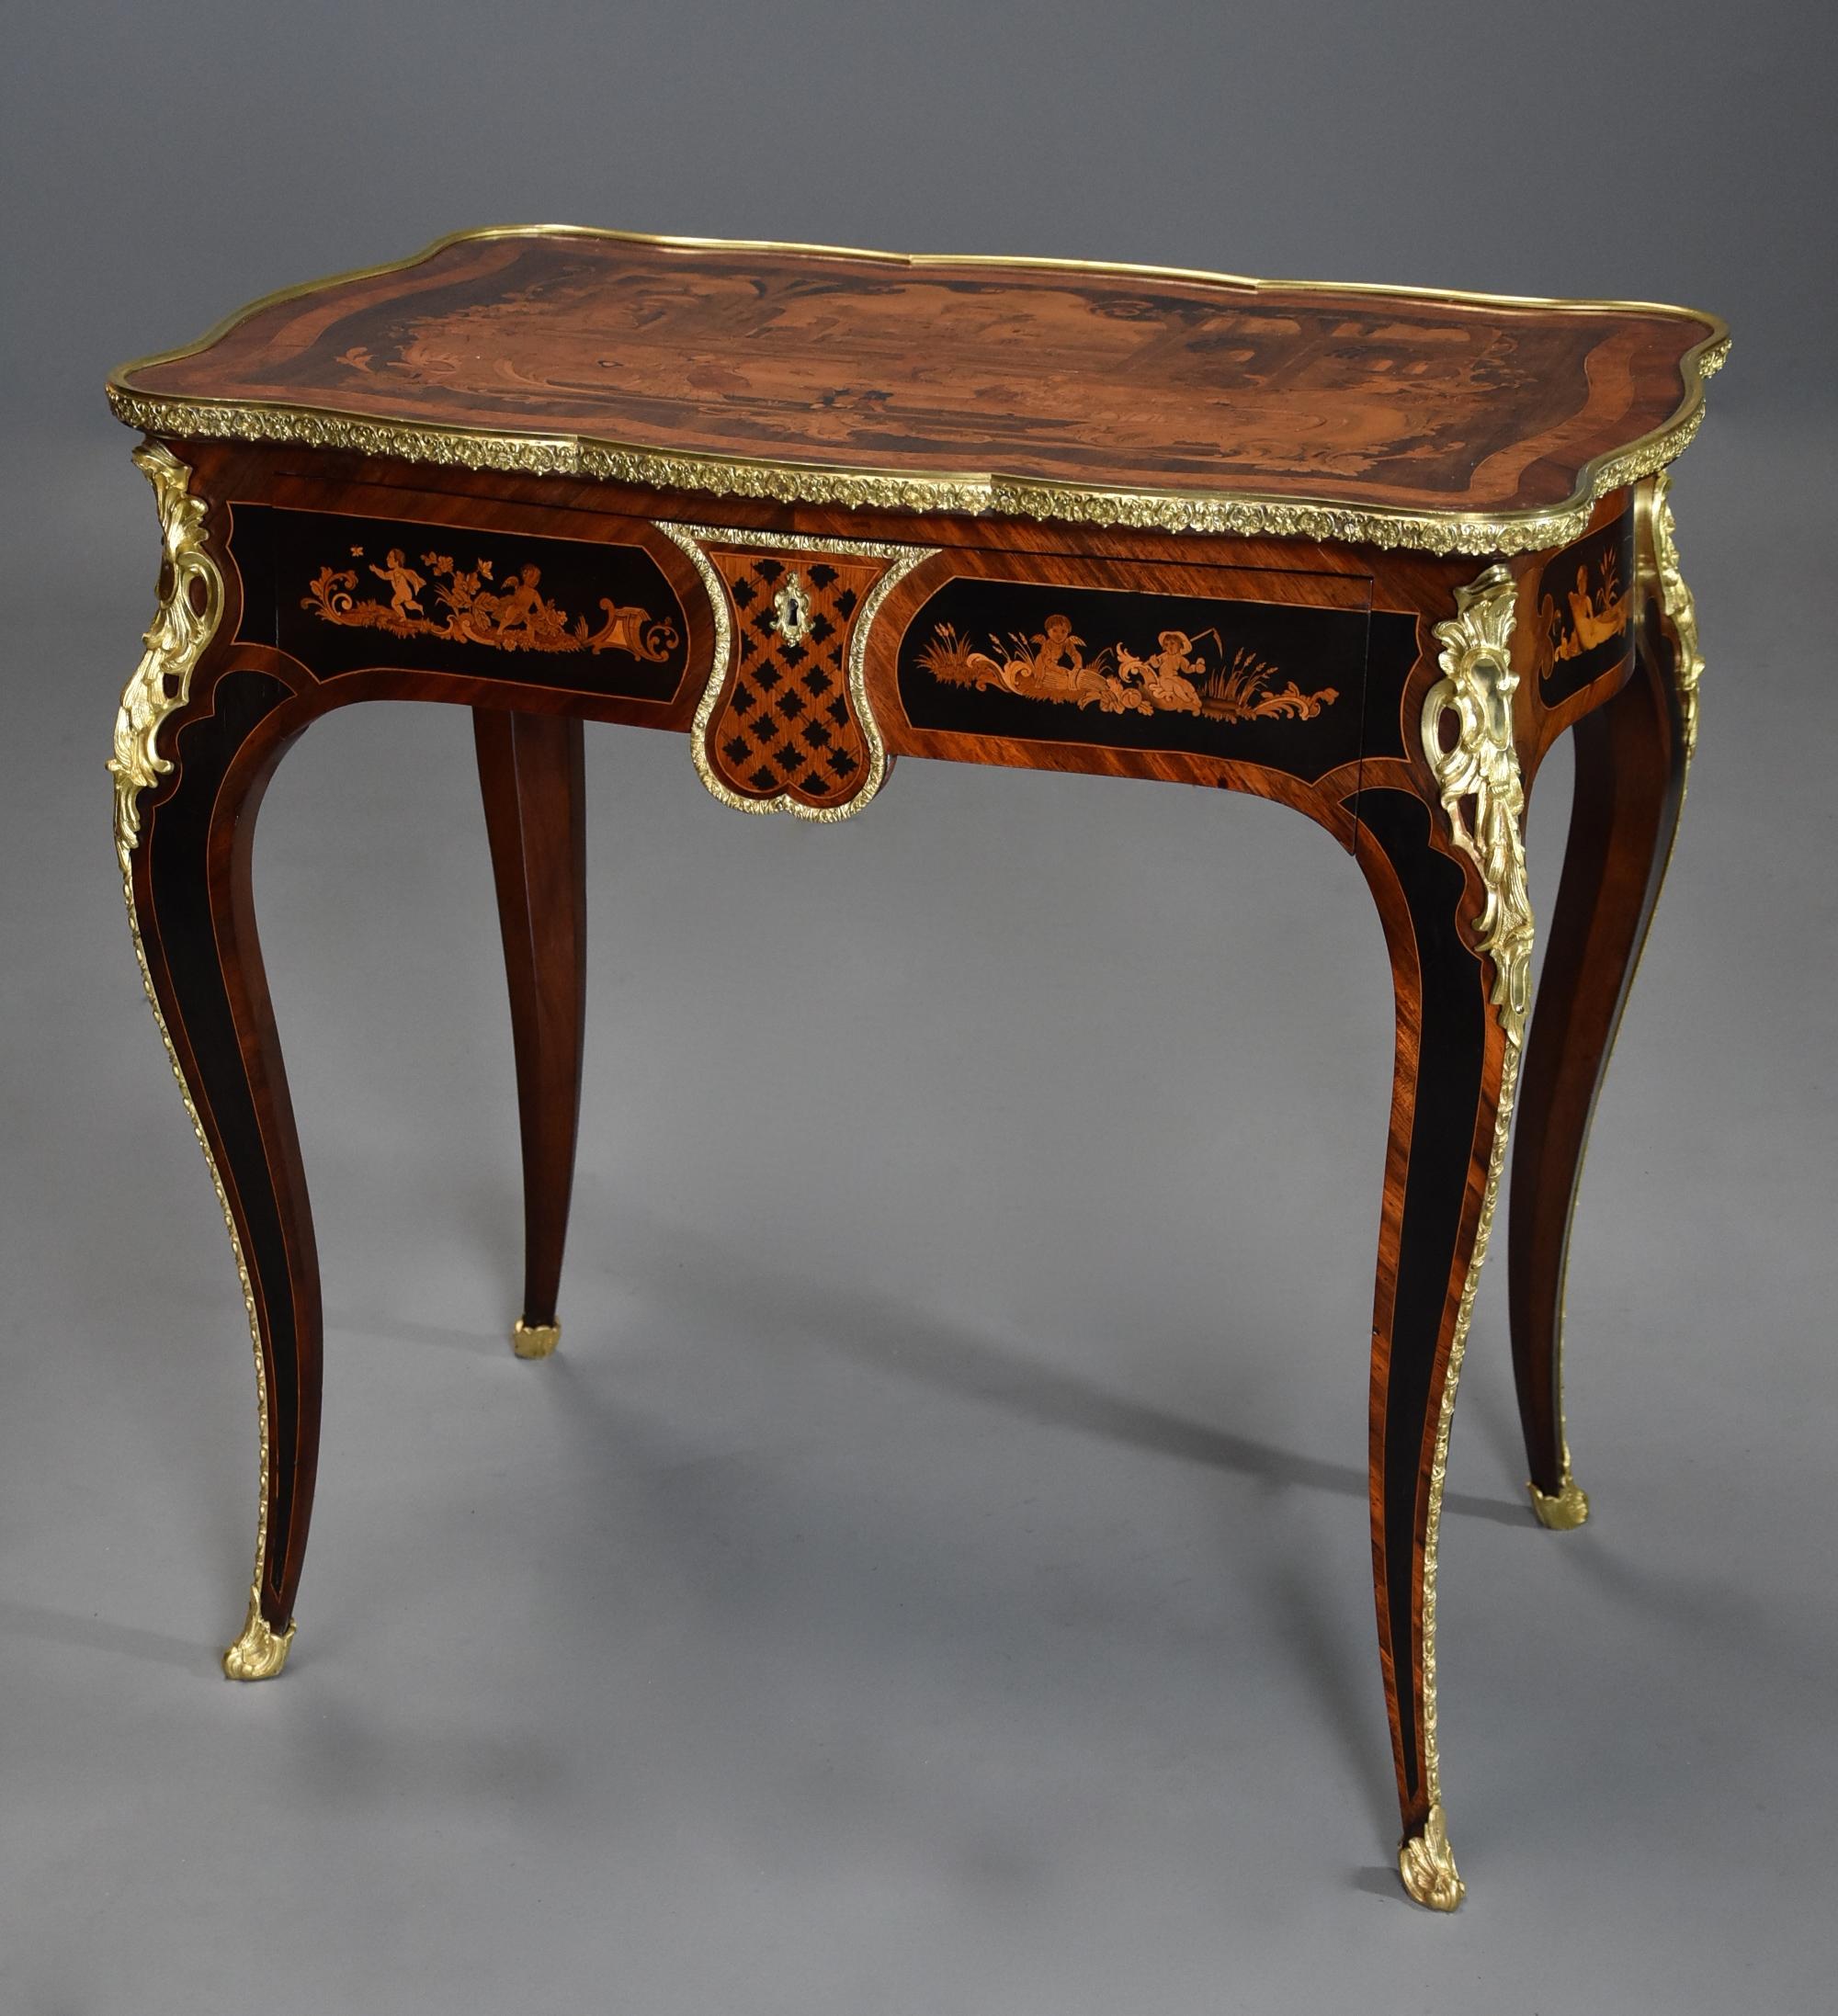 A mid-19th century, French fine quality Kingwood inlaid centre table.

This table consists of a shaped top with extremely fine quality marquetry decoration inlaid with exotic woods with an ebony ground, the inlaid top consisting of a central